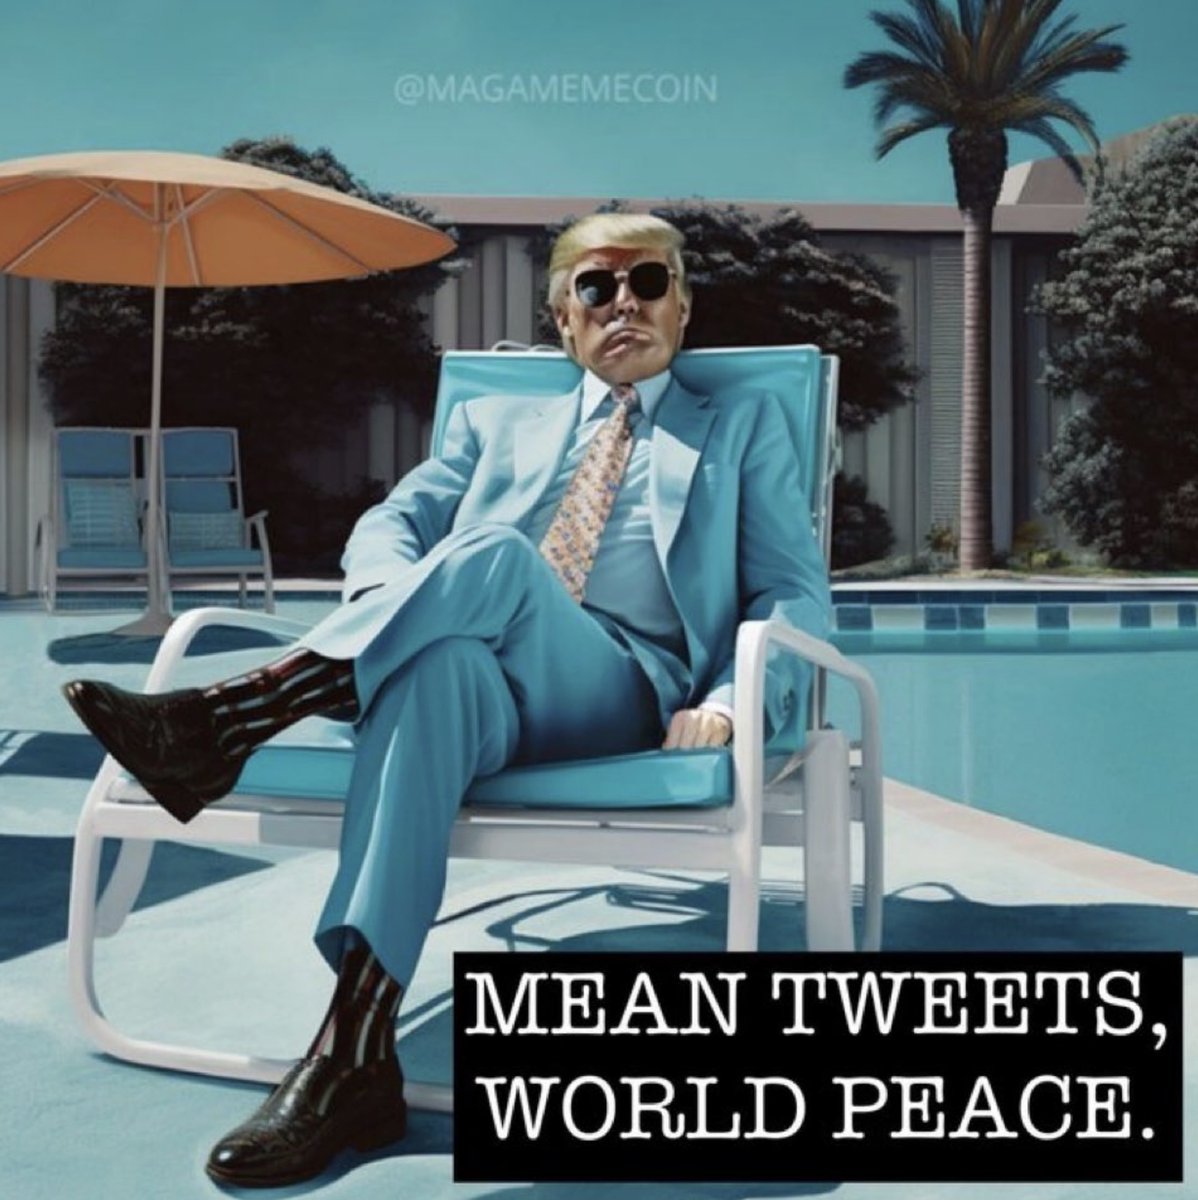 ‘Mean Tweets, World Peace’: Trump Wins the Meme War More voters agree with a popular social media message in favor of former President Donald Trump than agree with a pro-Joe Biden message. Meme by @MAGAMEMECOIN More At Rasmussen Reports: tinyurl.com/39a5xdnk